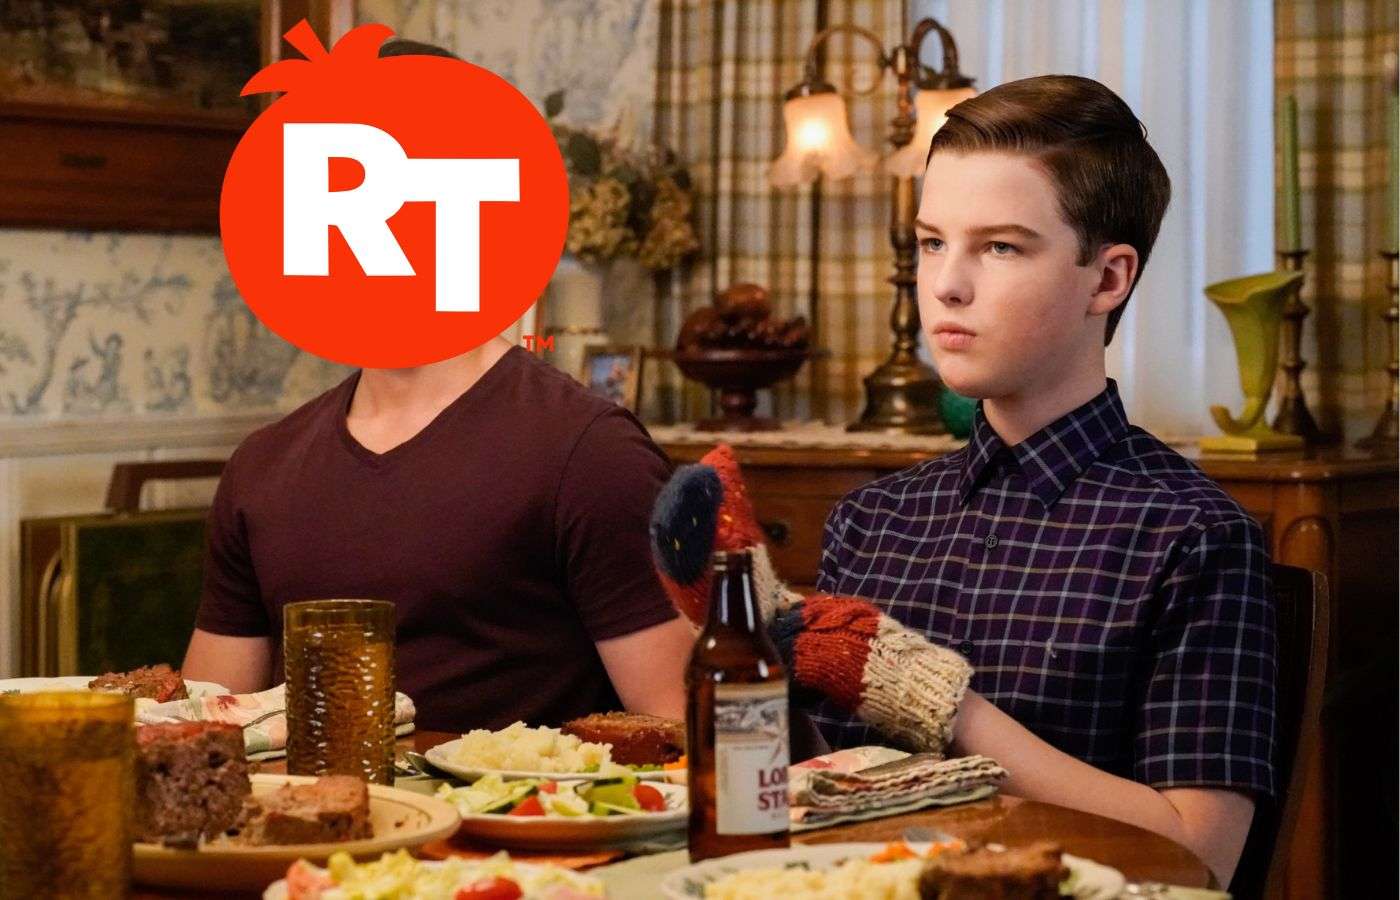 Young Sheldon and the Rotten Tomatoes logo